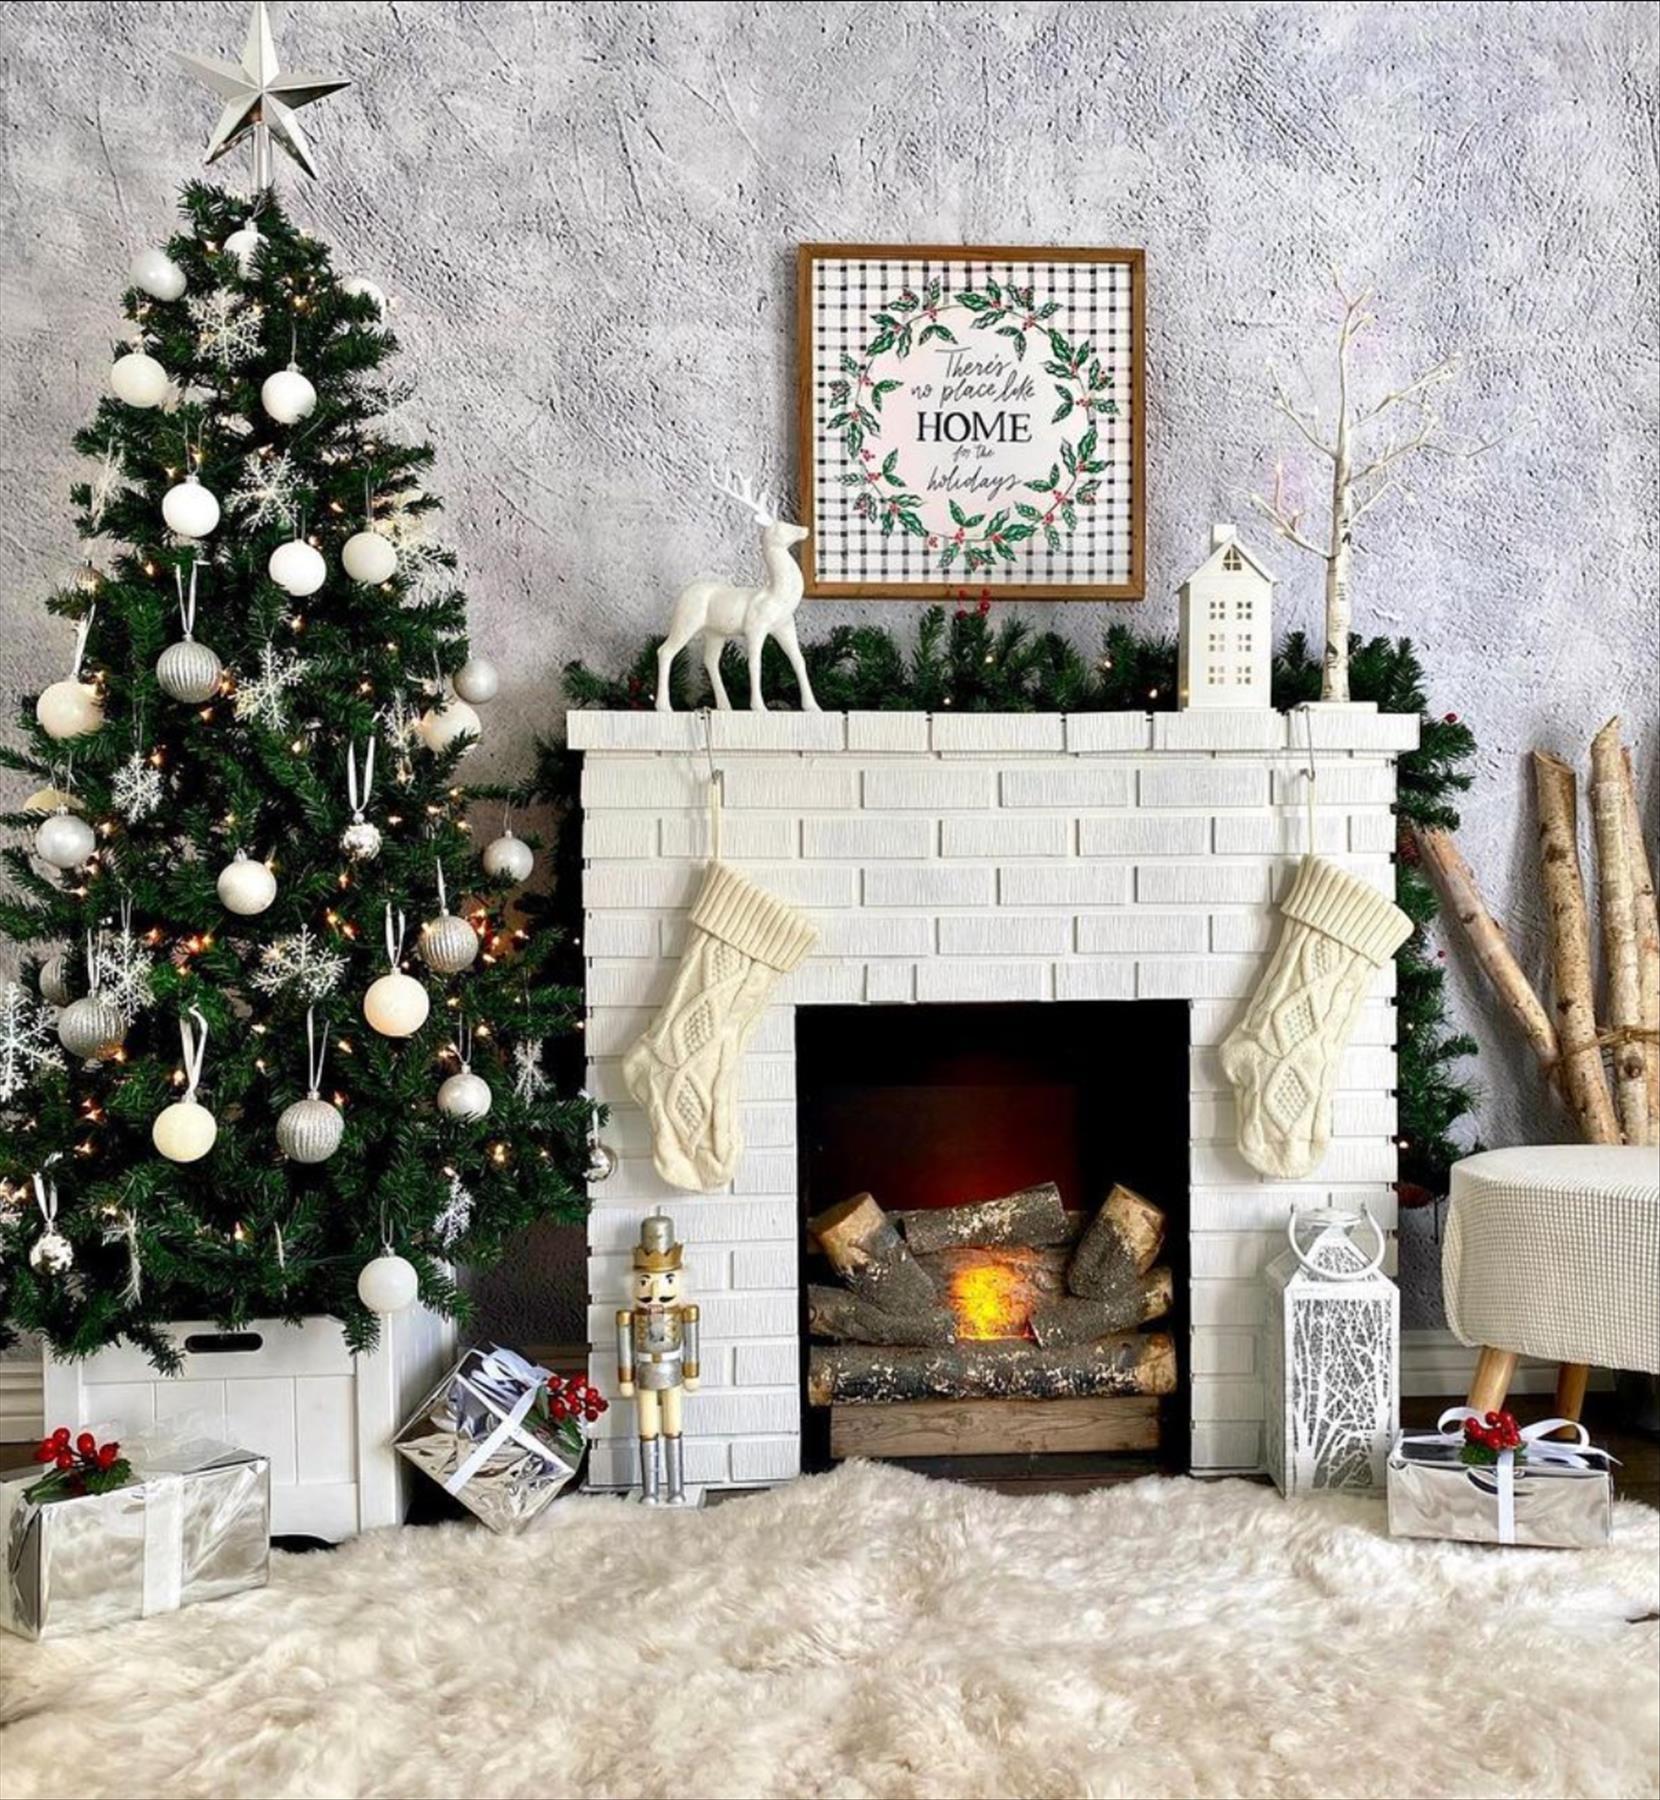 Merry Christmas decoration ideas to rock this Winter